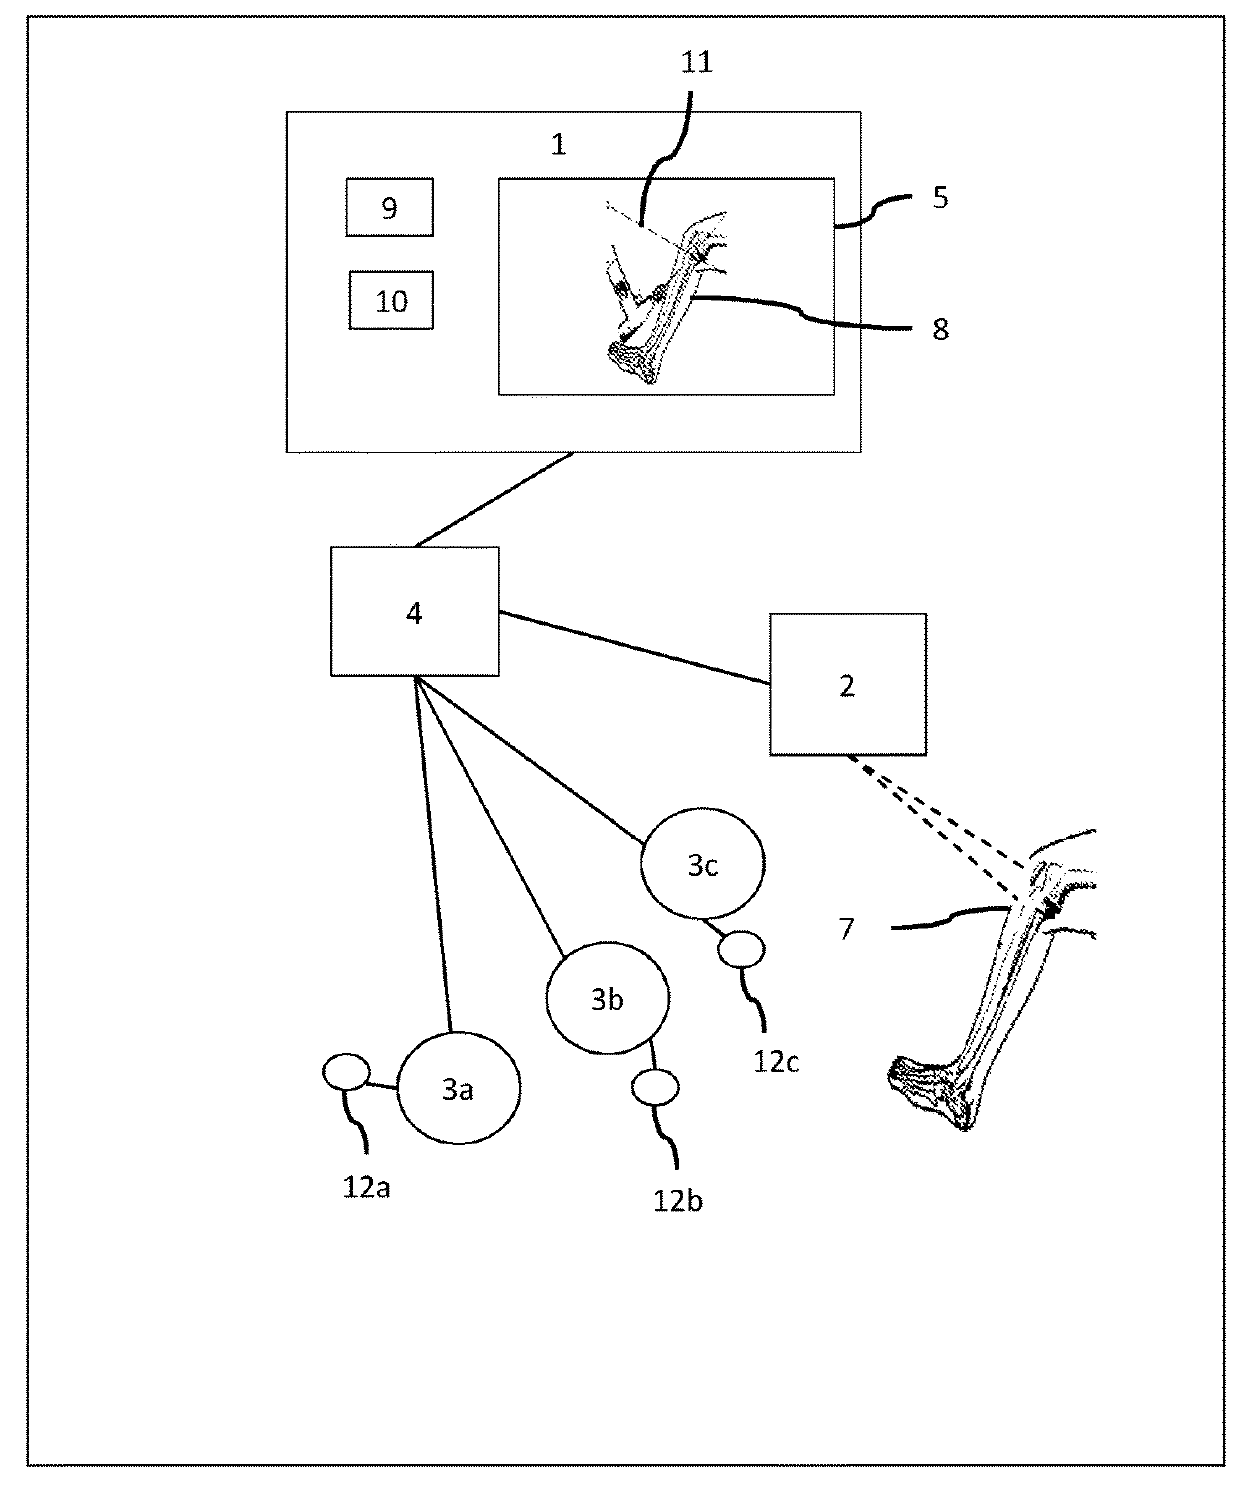 Method and system for computer assisted surgery